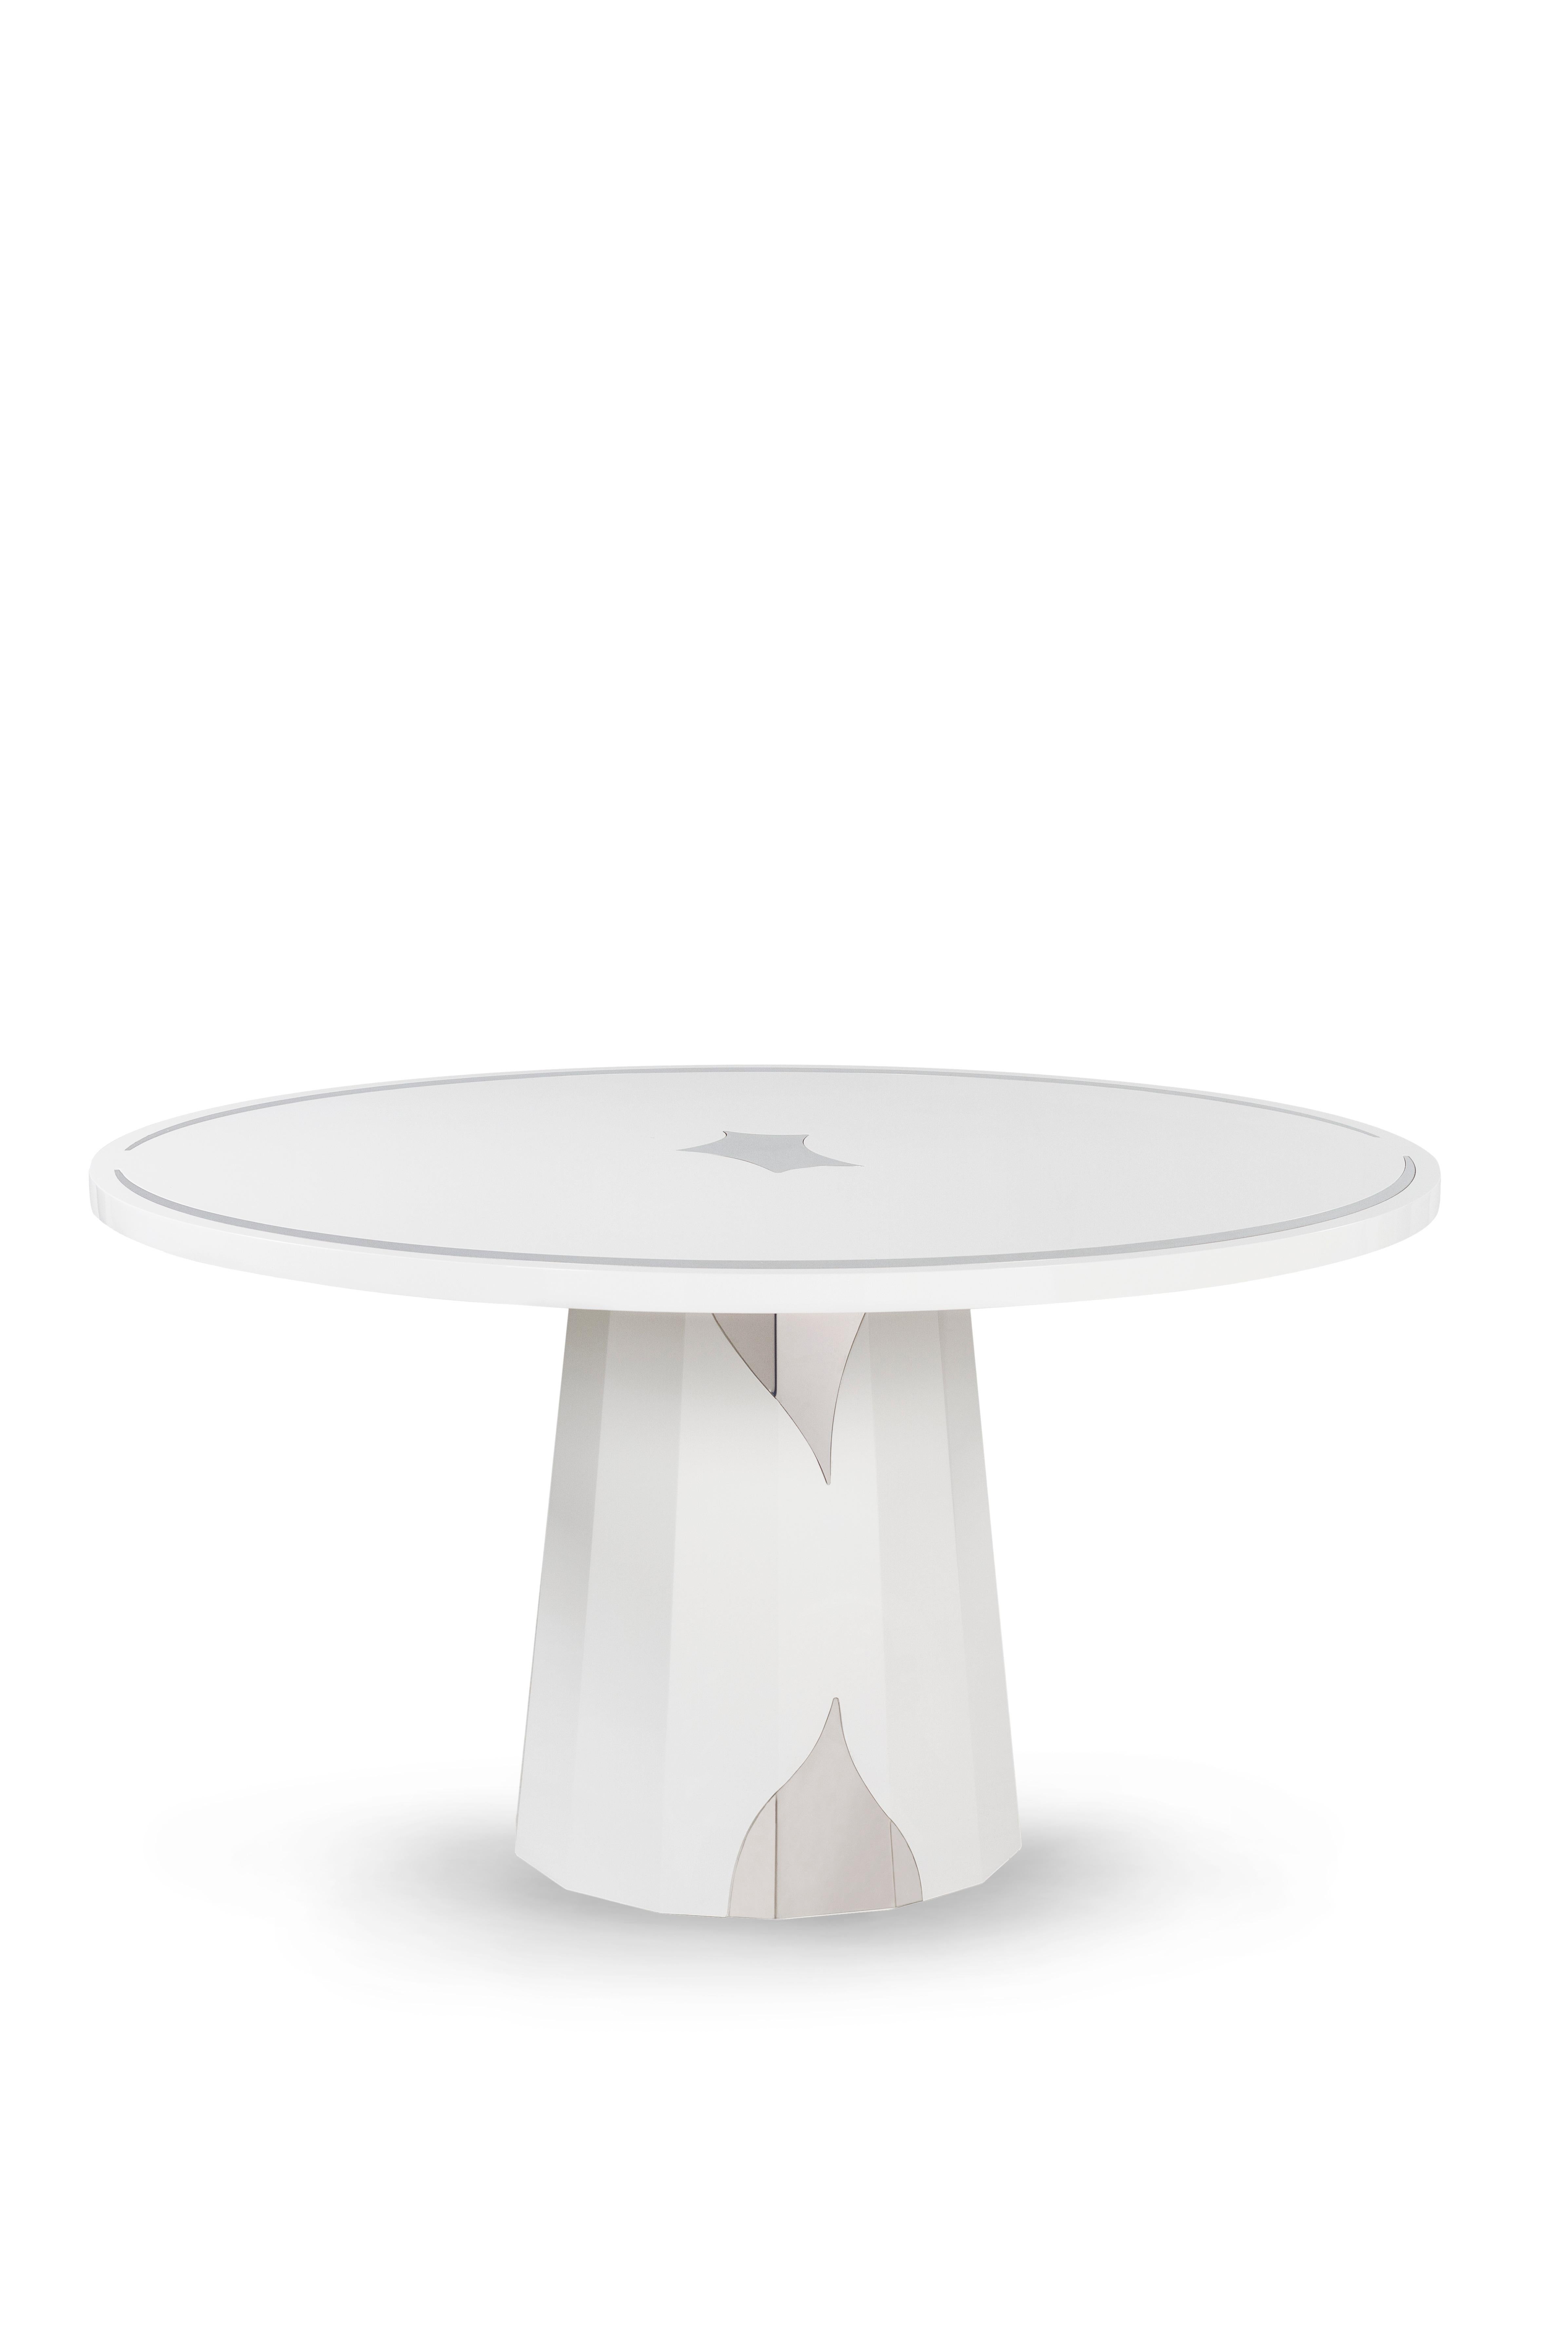 Howlite Dining Table 4-Seats, Modern Collection, Handcrafted in Portugal - Europe by GF Modern.

Howlite white dining table represents the dawn of a new modern era. The stainless steel inlay details complement the bold and eye-catching design,